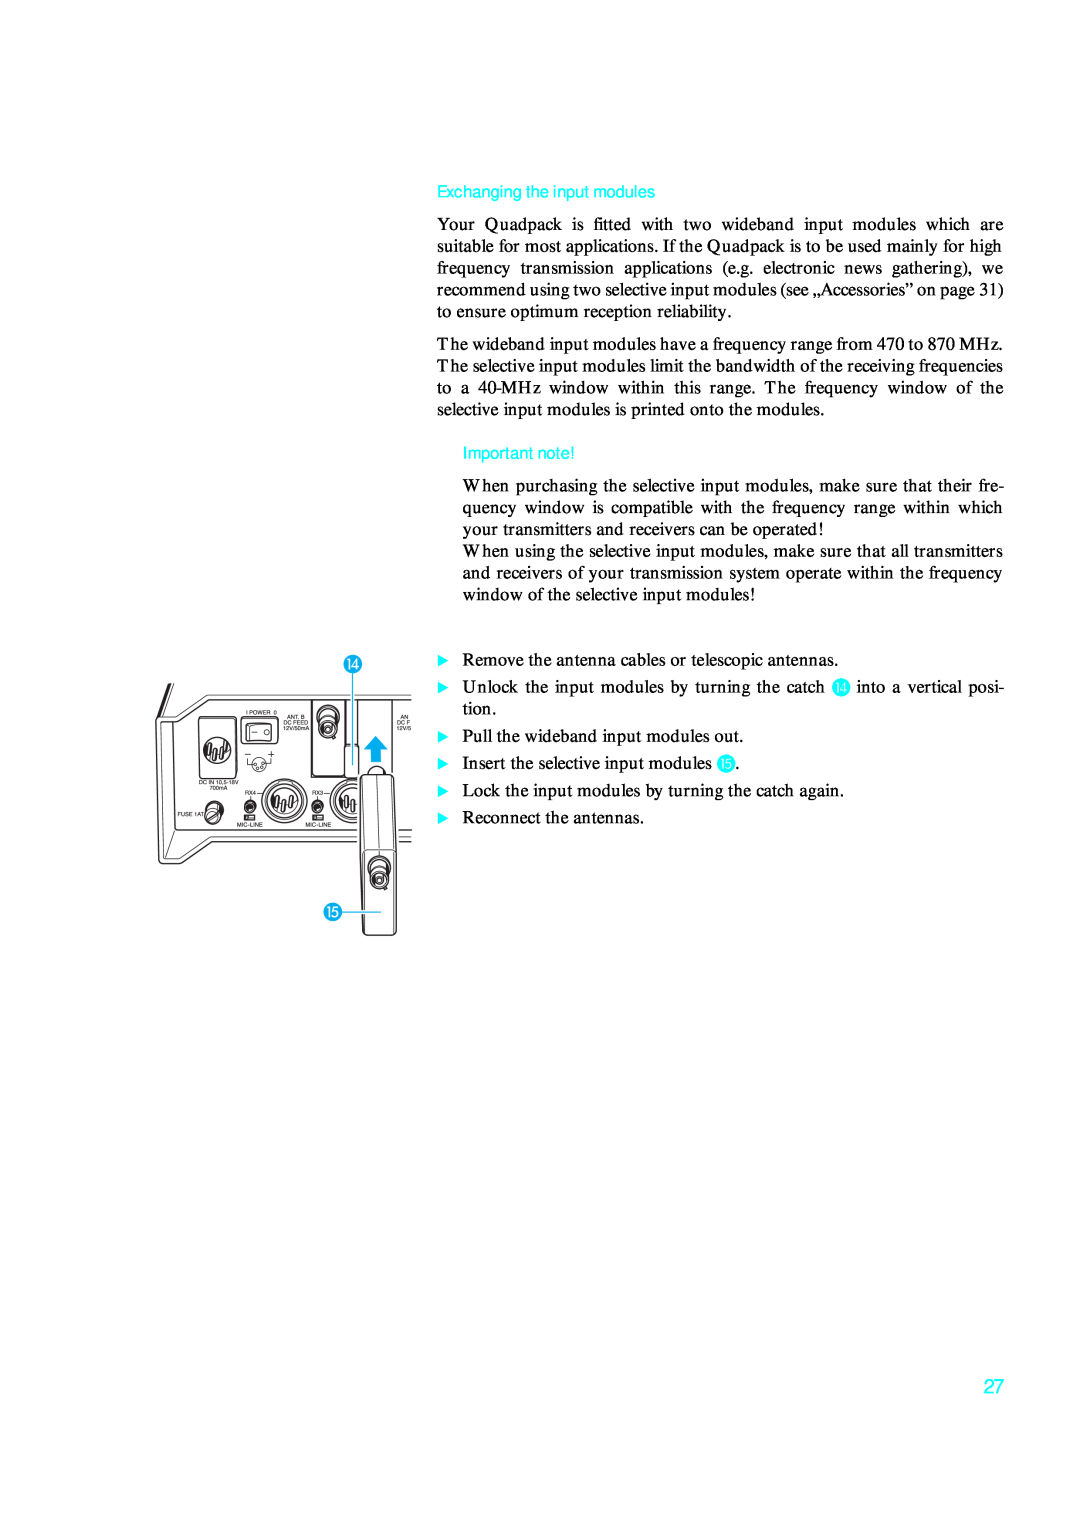 Sennheiser qp 3041 instruction manual Exchanging the input modules, Important note 